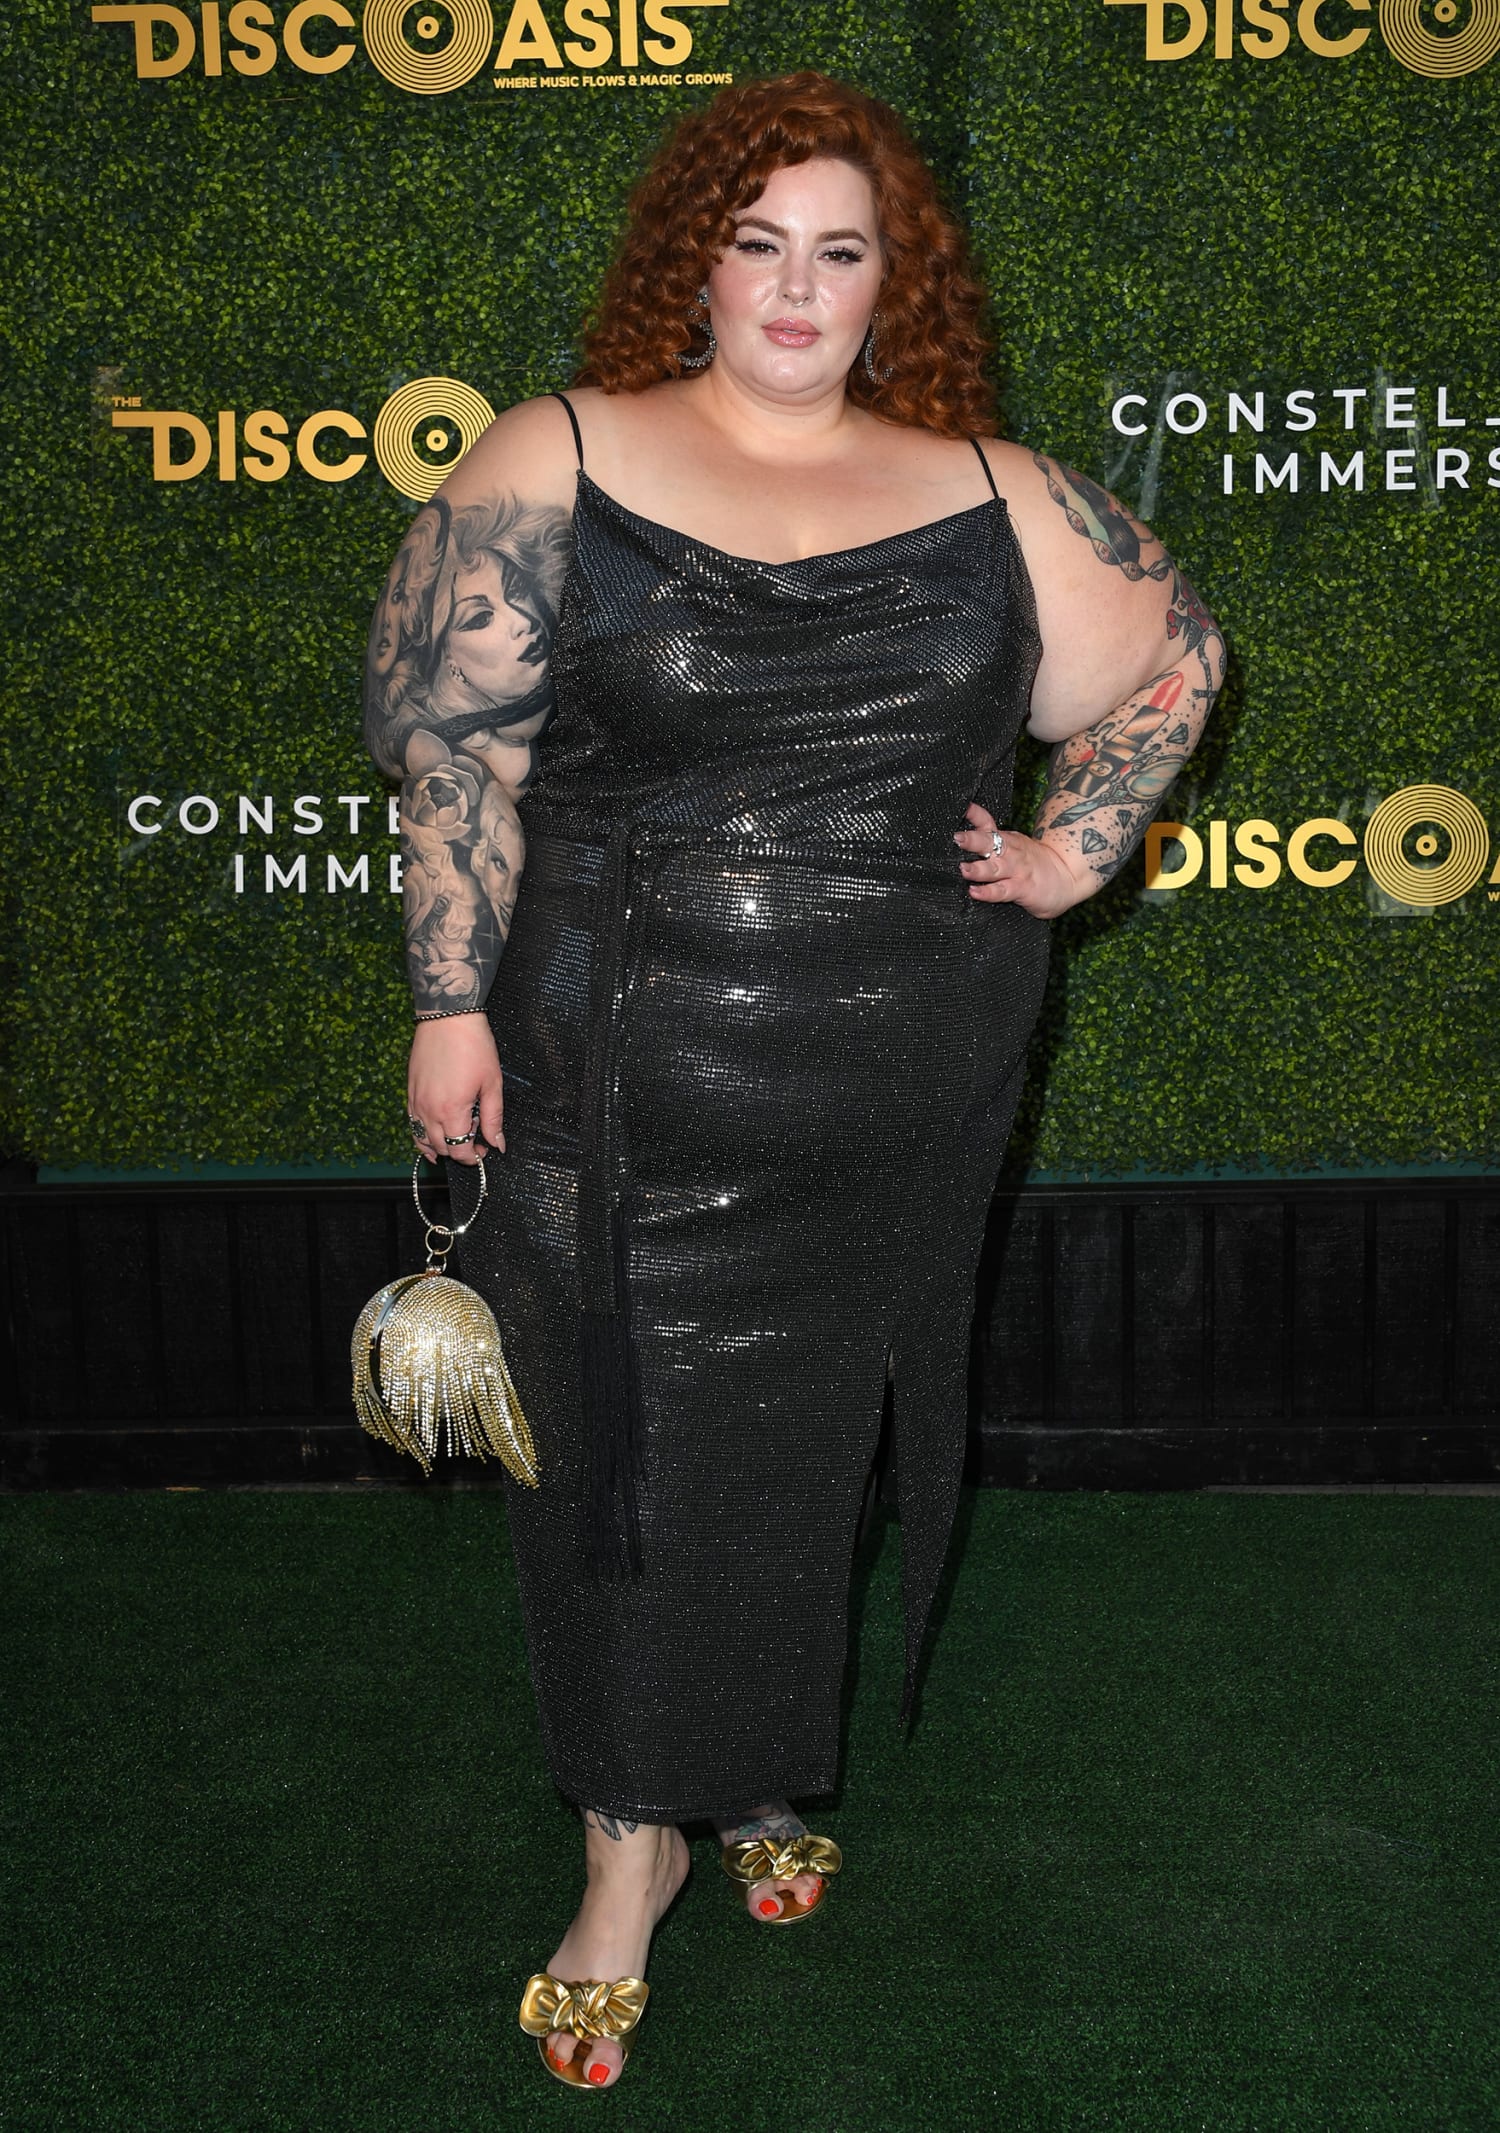 Body-positivity model Tess Holliday opens up about eating disorder - Good  Morning America